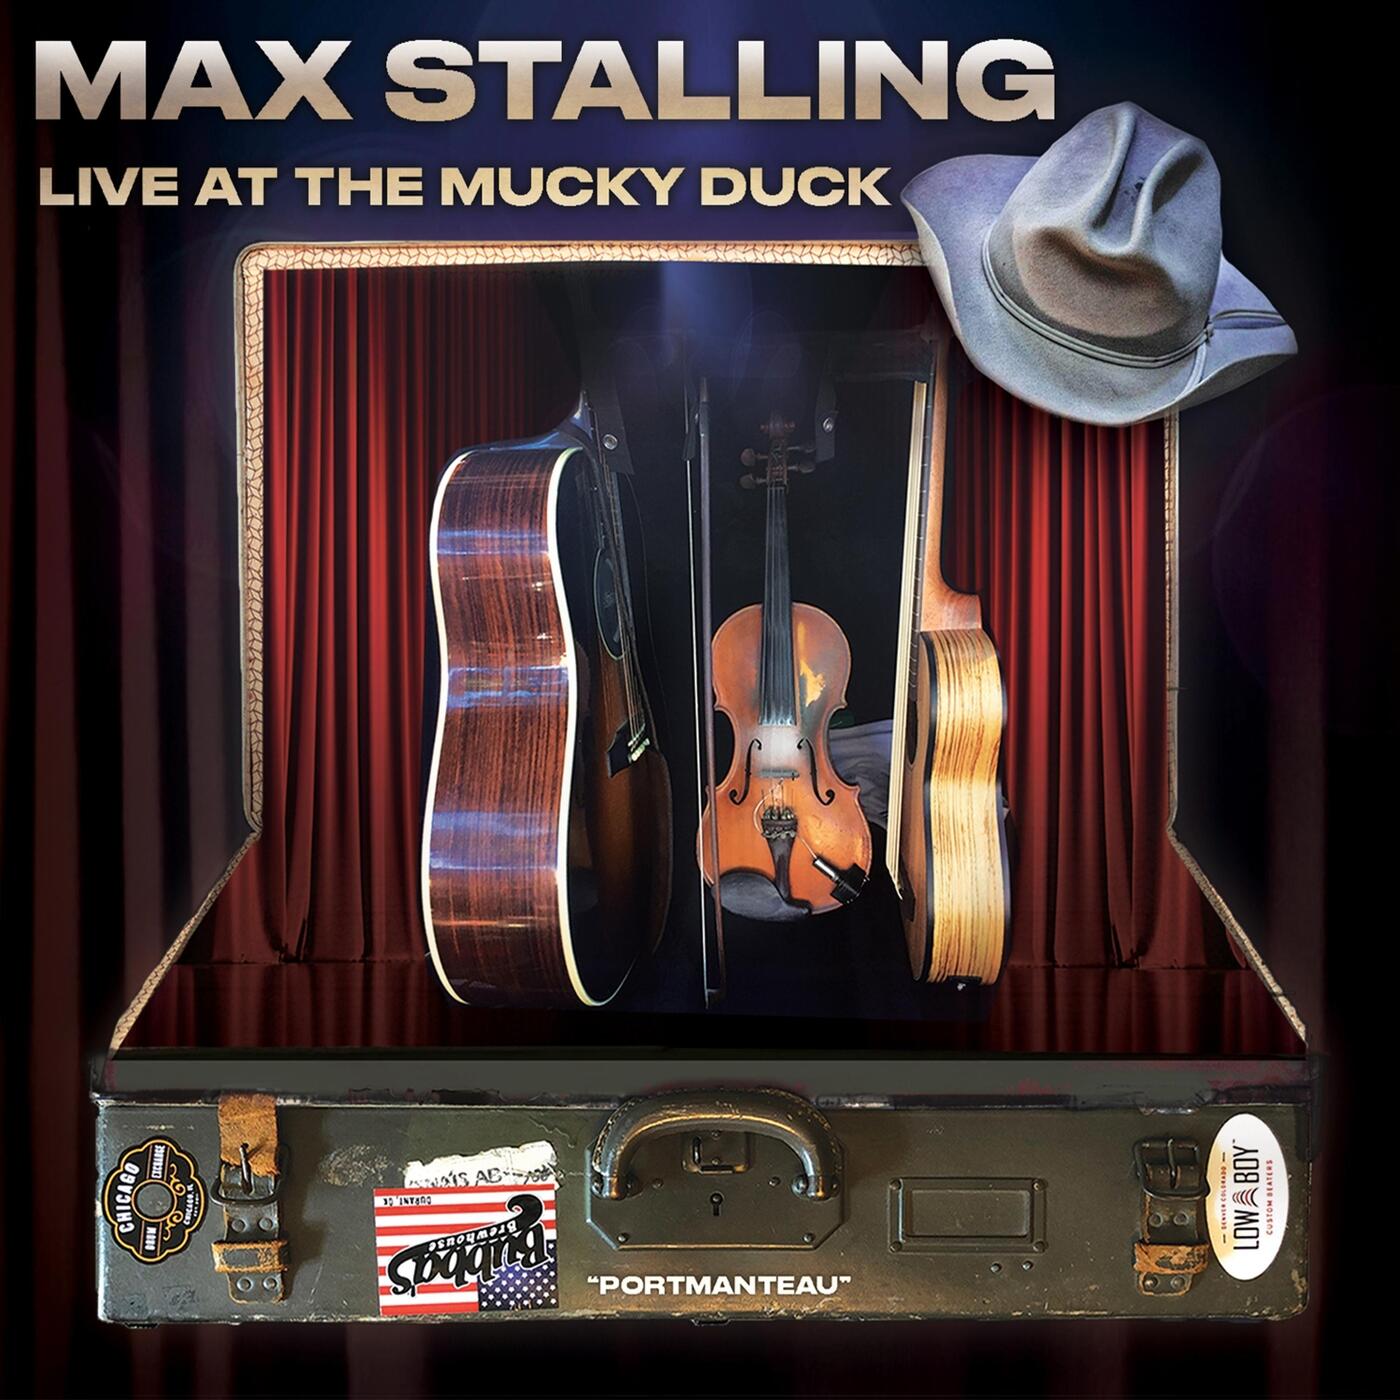 Max Stalling Live at the Mucky Duck Portmanteau iHeart